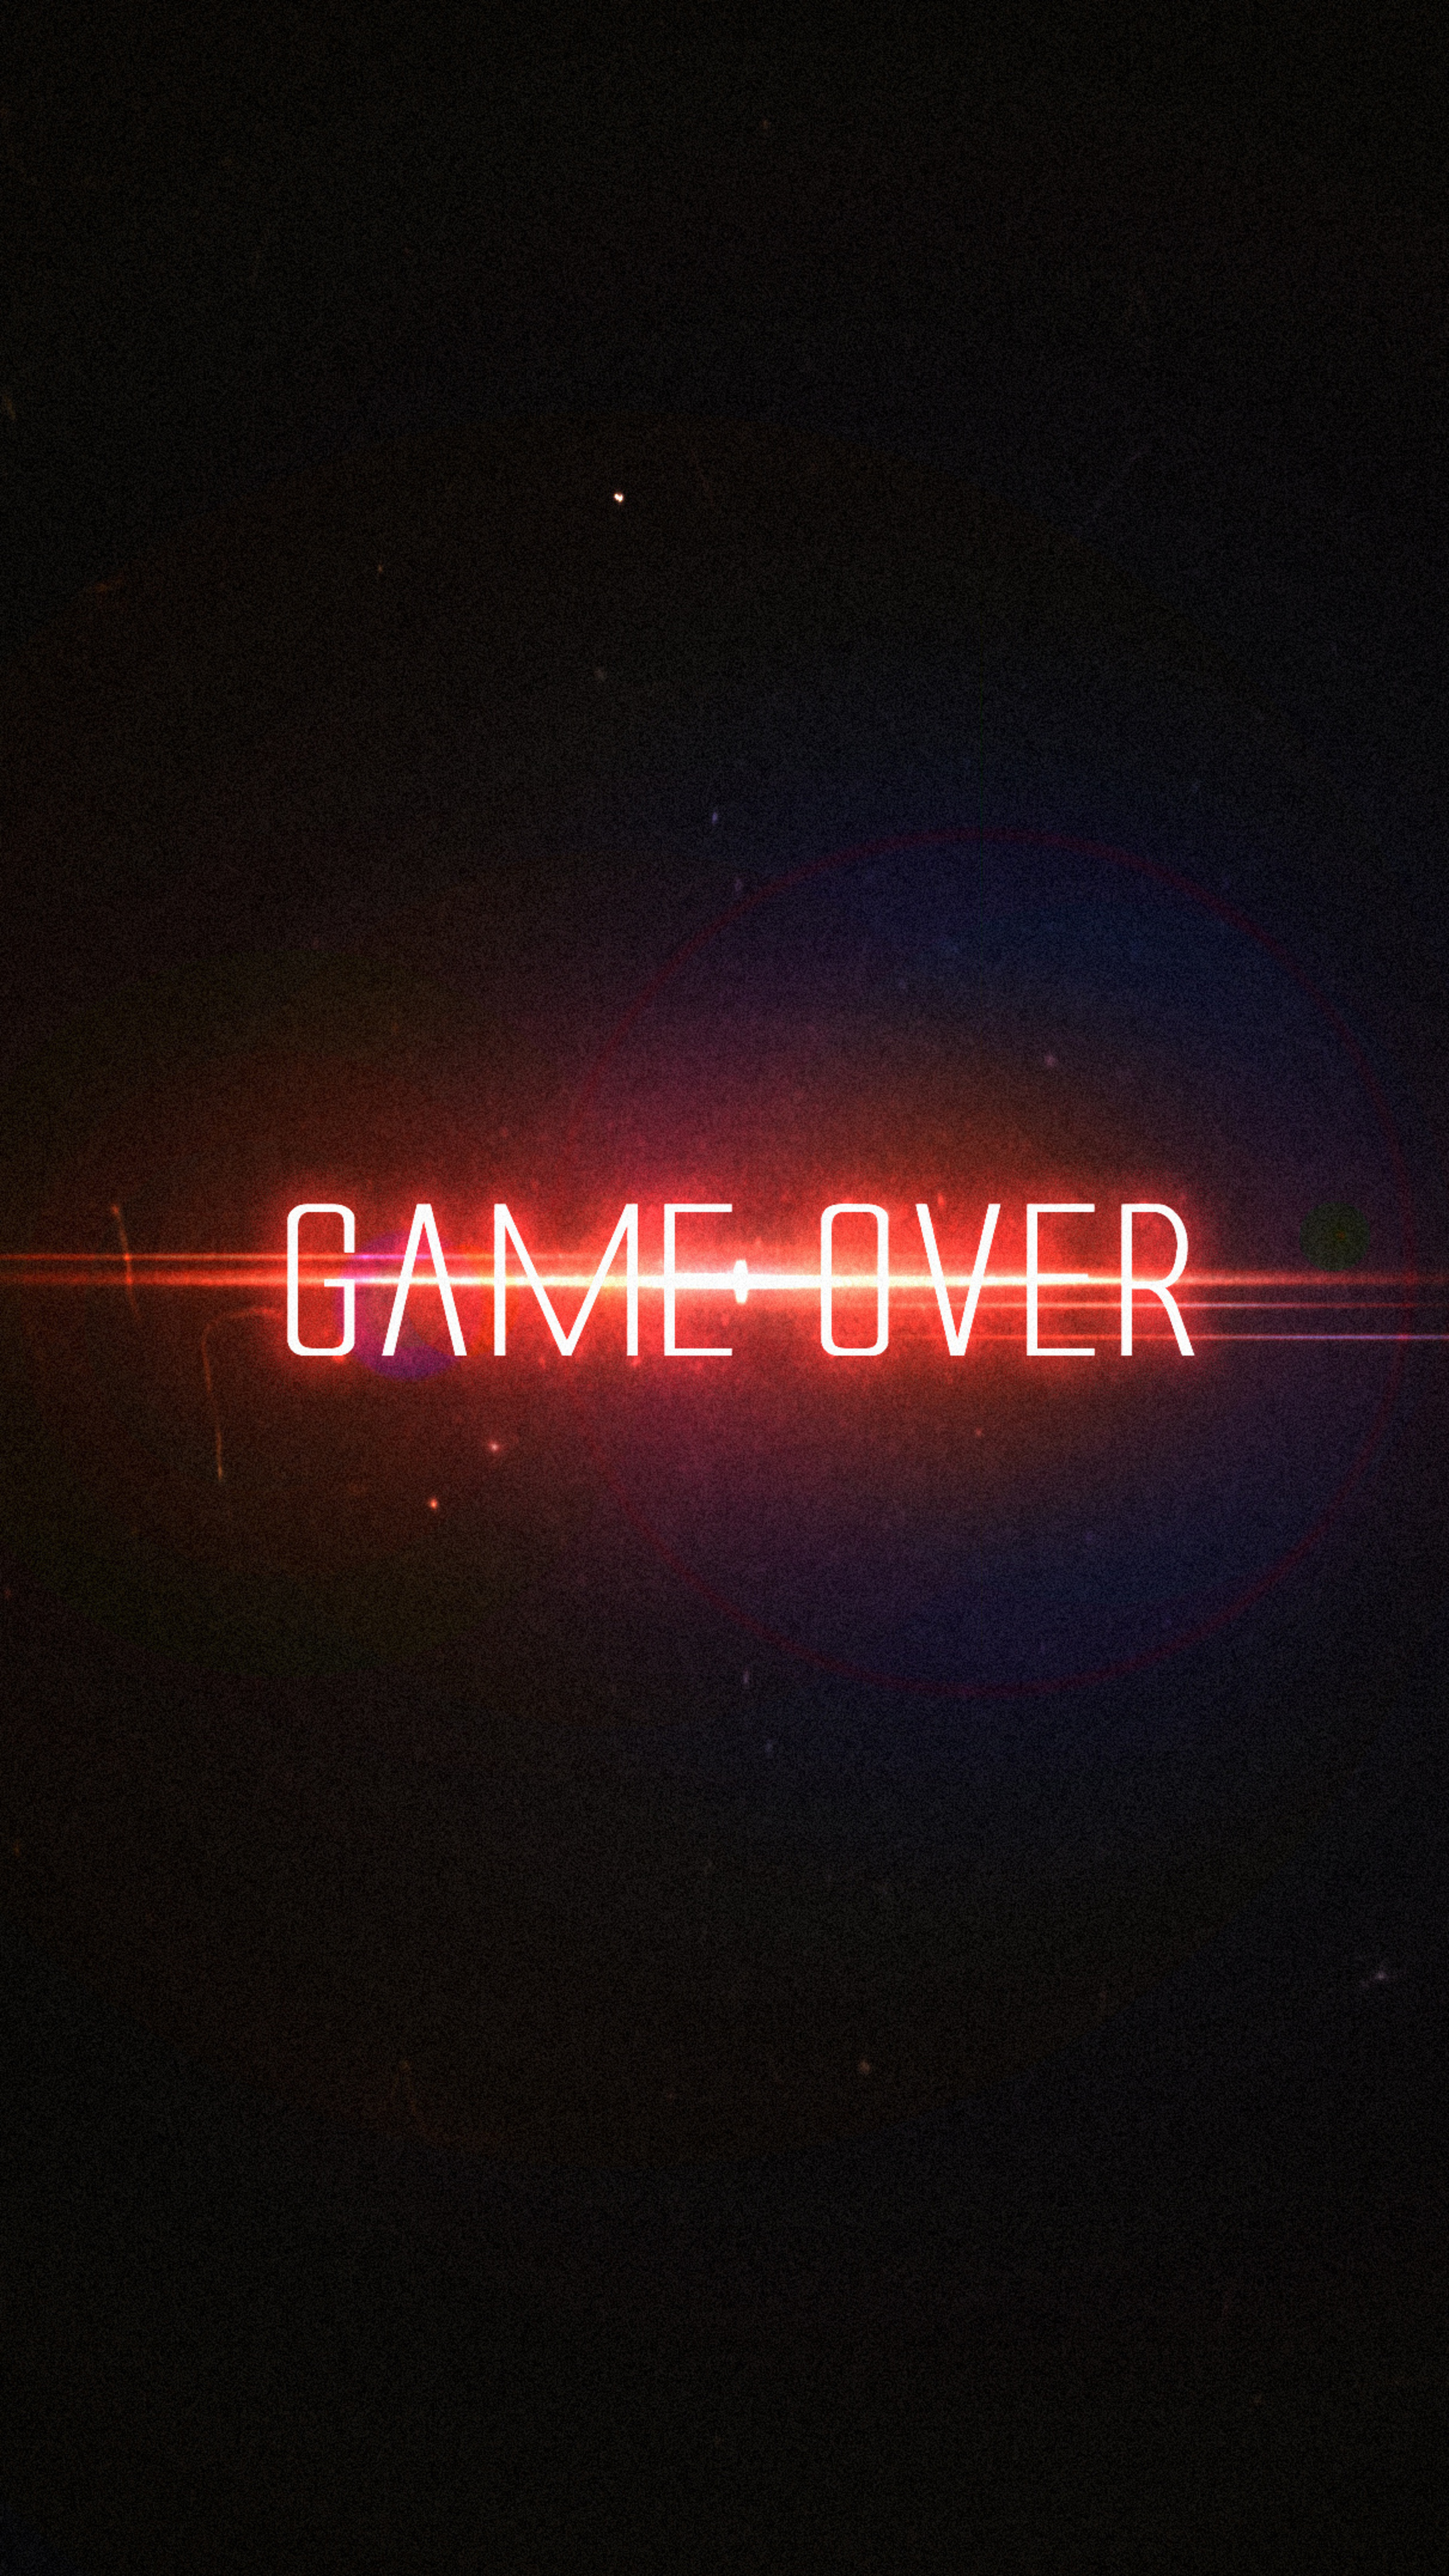 Game Over, Typographic design, 4K resolution, Sony Xperia, 2160x3840 4K Phone